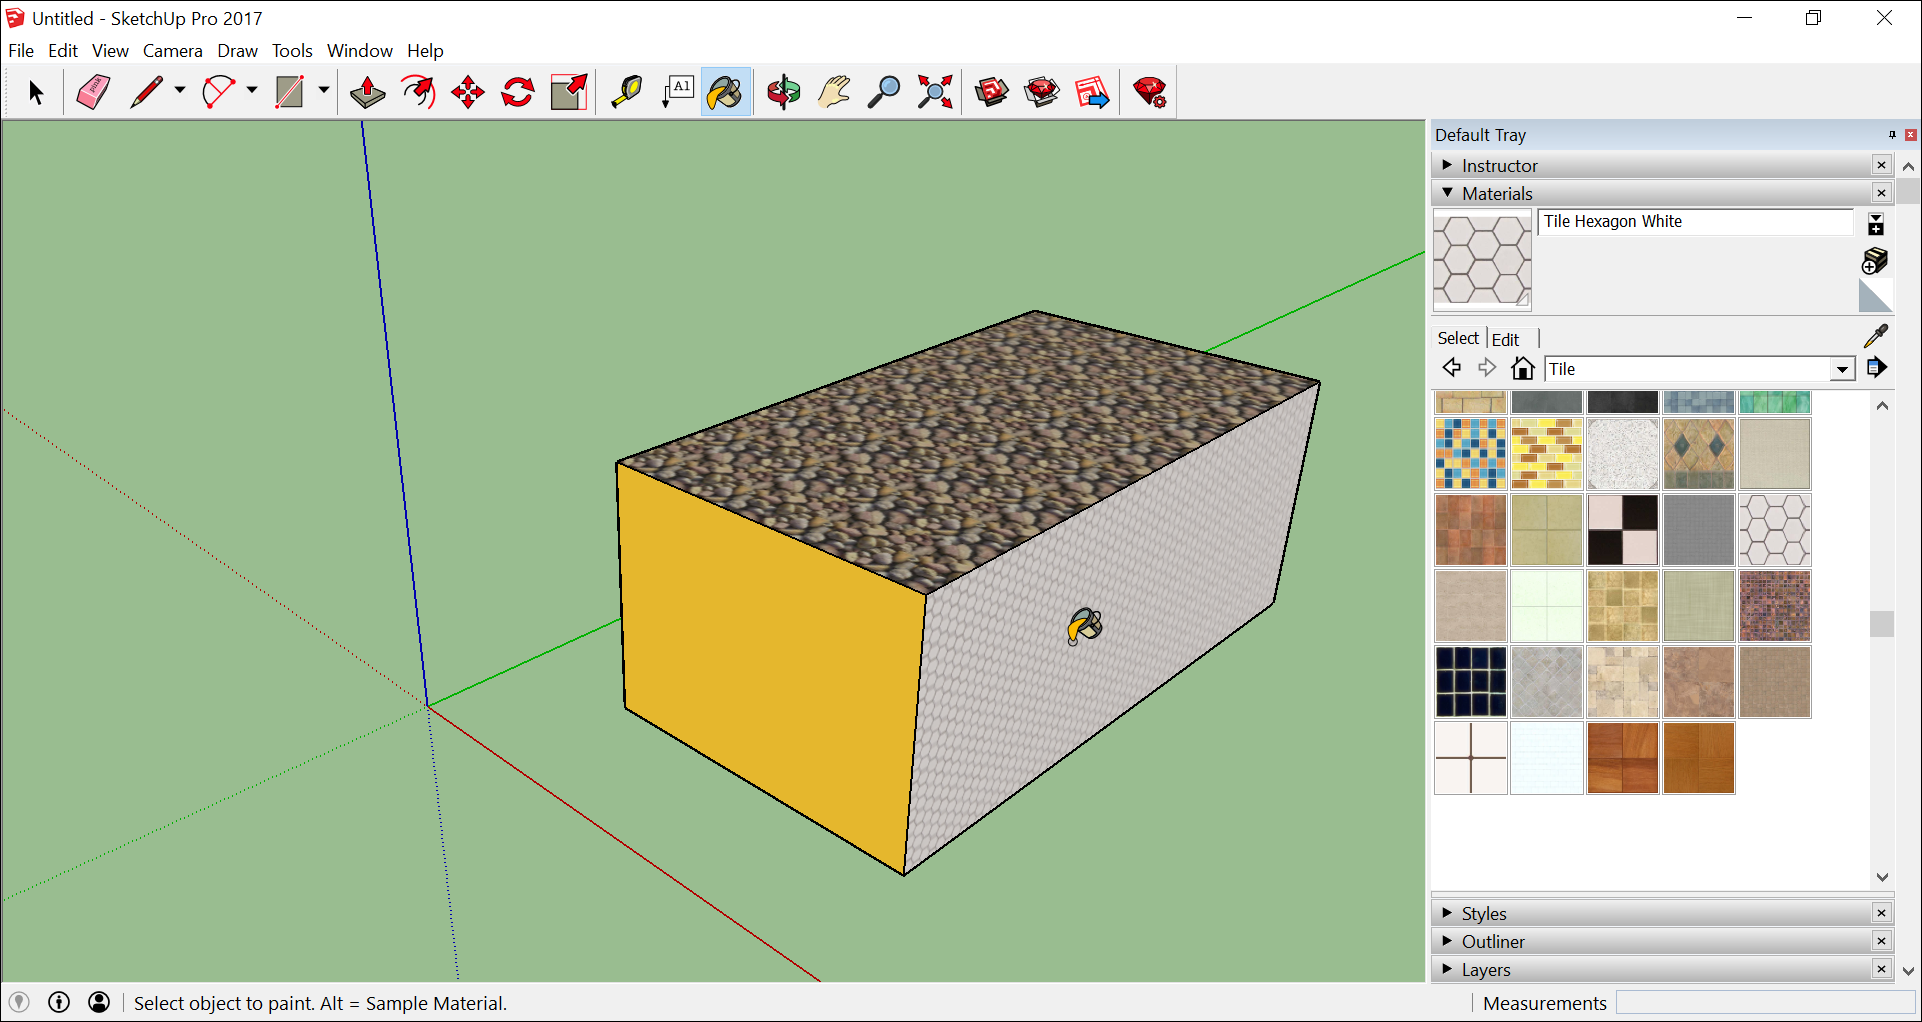 The 30 Second Secret To Creating Your First 3D Model In SketchUp